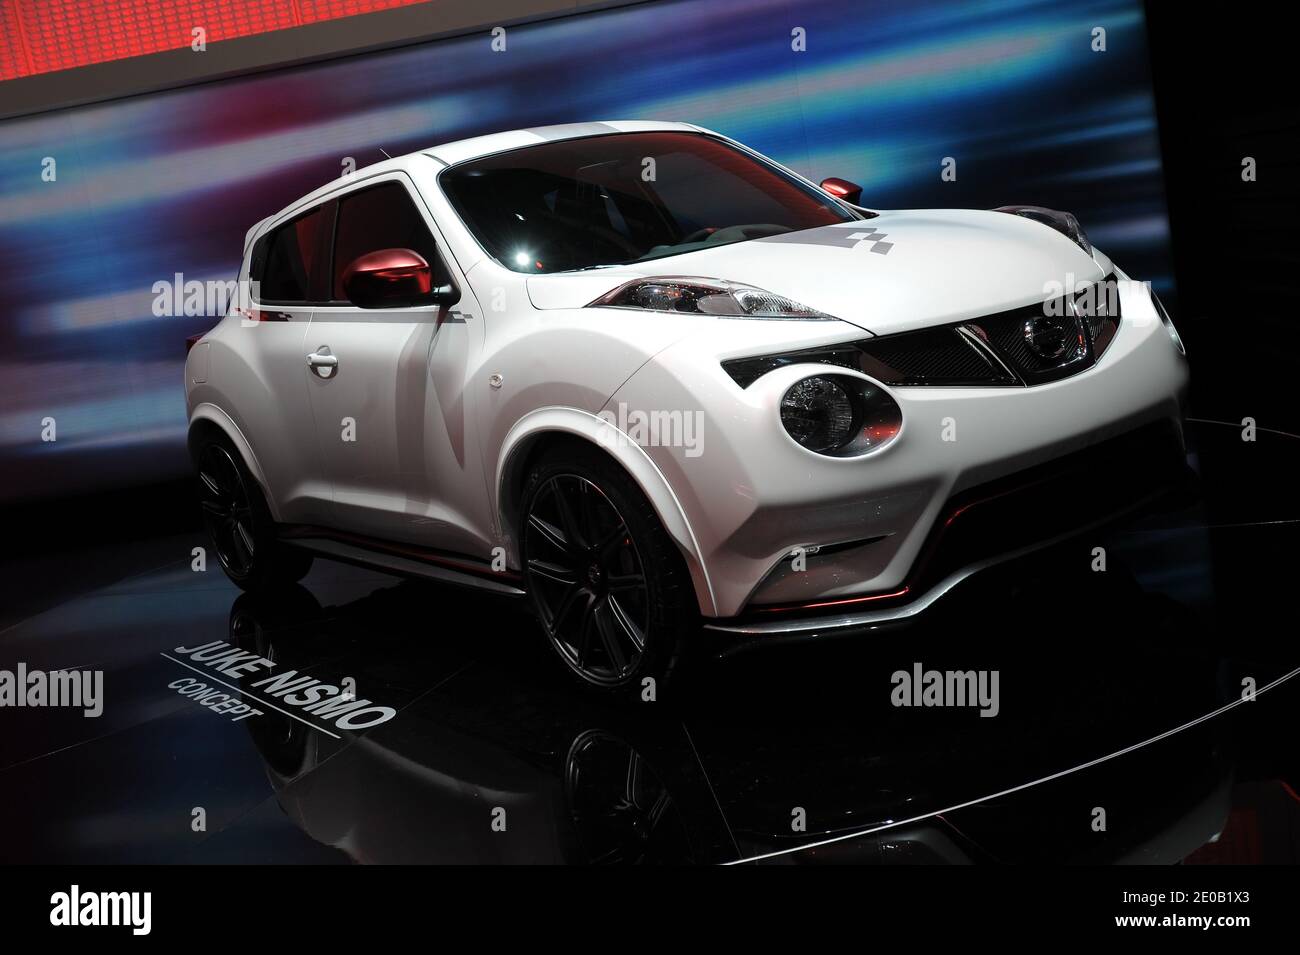 Nissan Juke Nismo Concept Car on display at the 82nd International Motor  Show and Accessories of Geneva, Switzerland on March 7, 2012. Photo by  Loona/ABACAPRESS.COM Stock Photo - Alamy